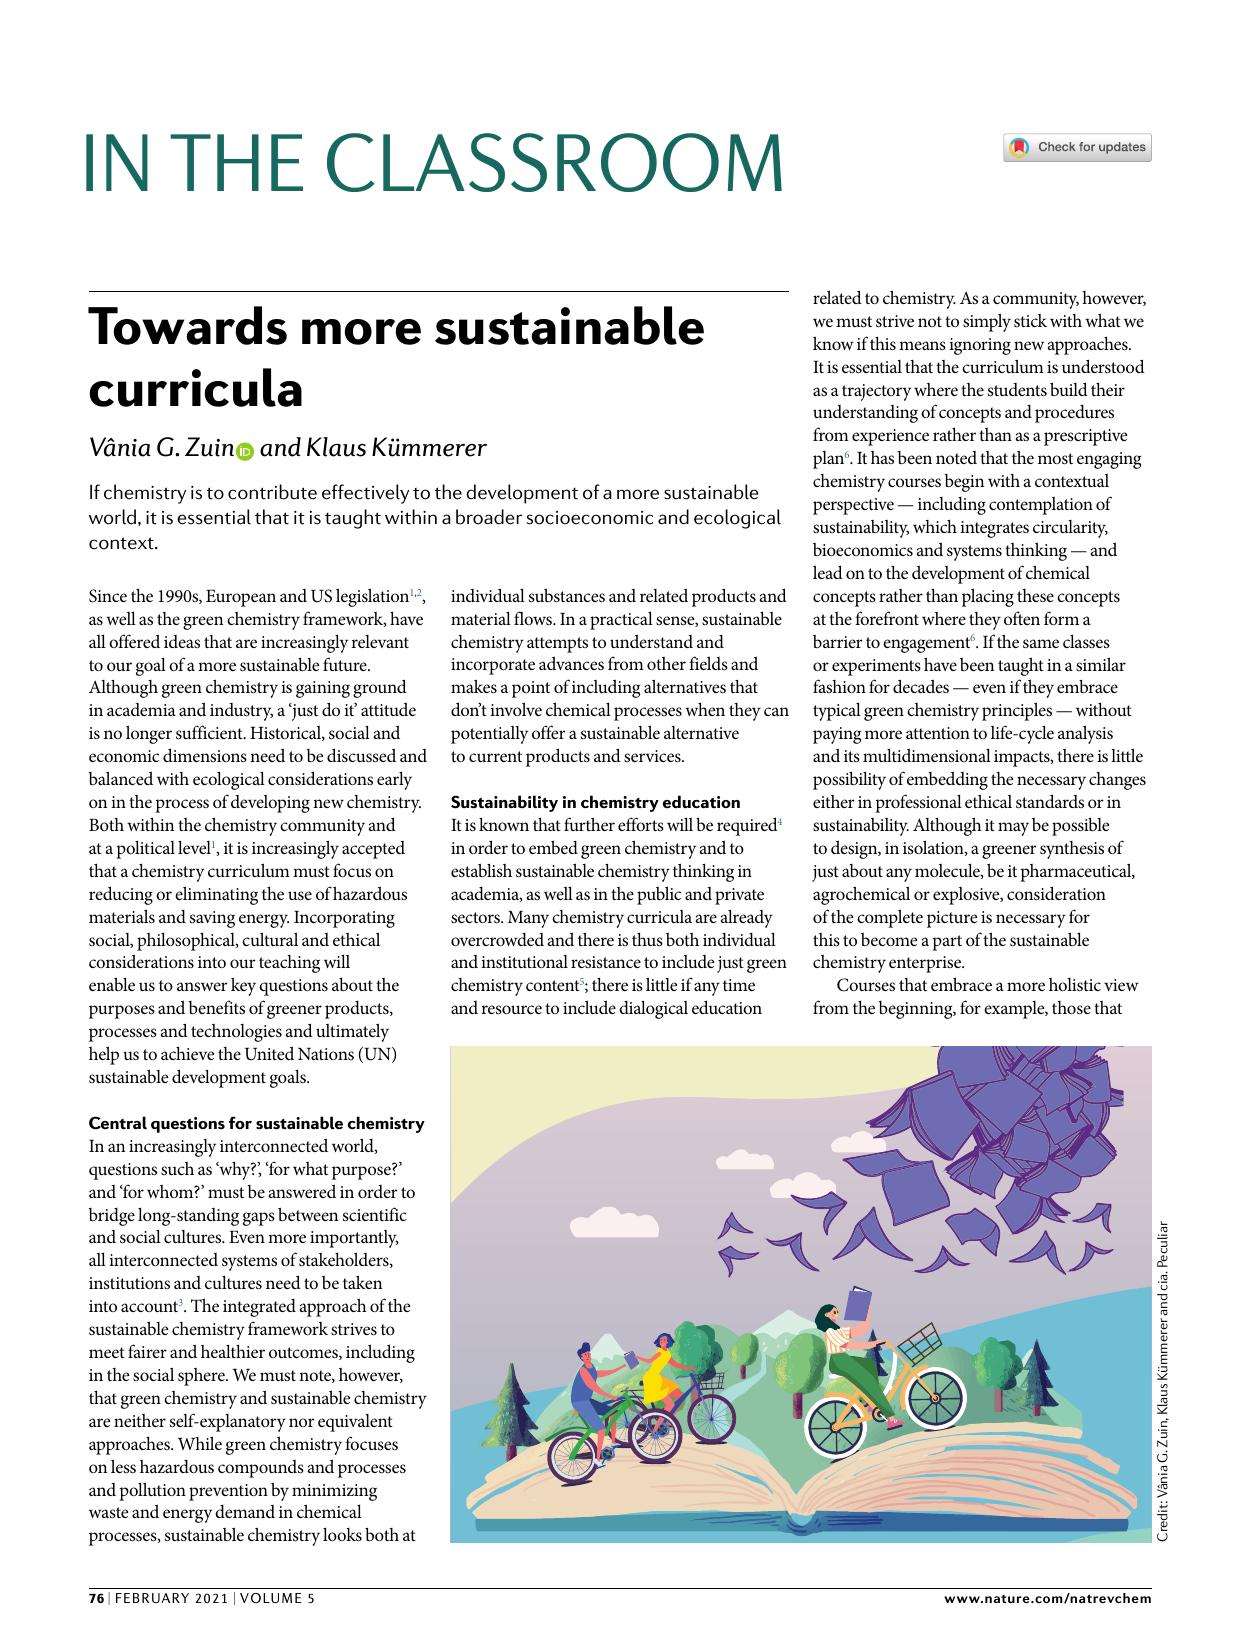 Towards more sustainable curricula by Vânia G. Zuin & Klaus Kümmerer